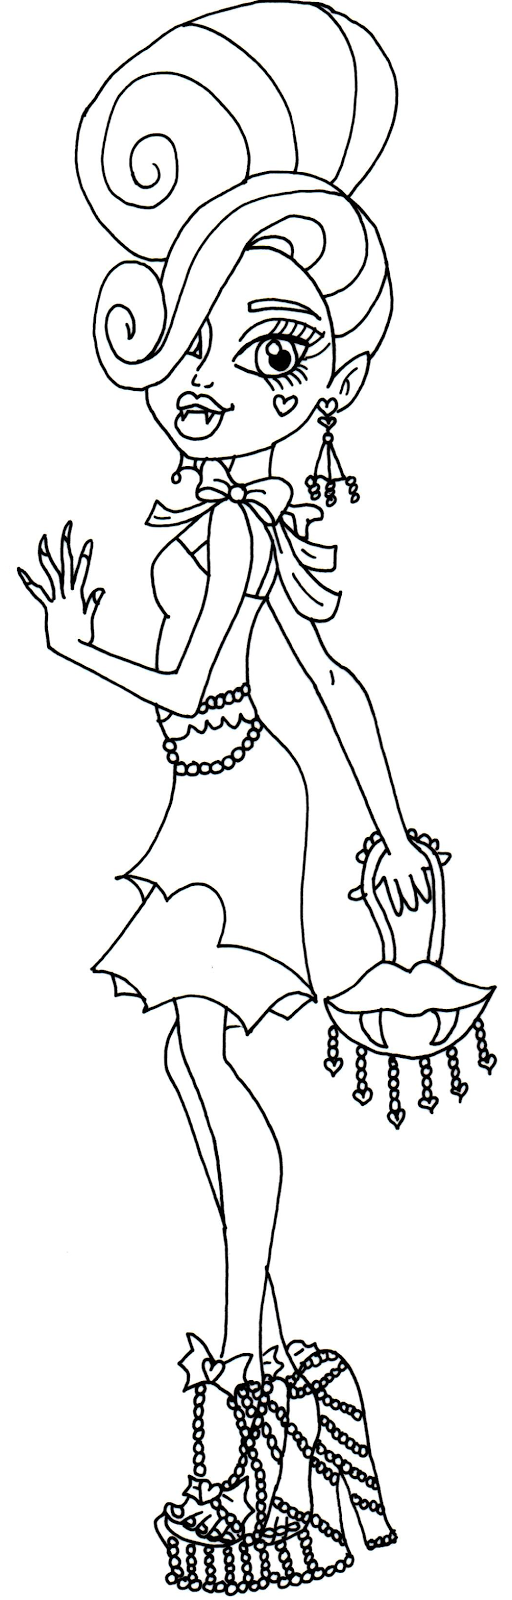 Free Printable Monster High Coloring Pages: Draculaura ...